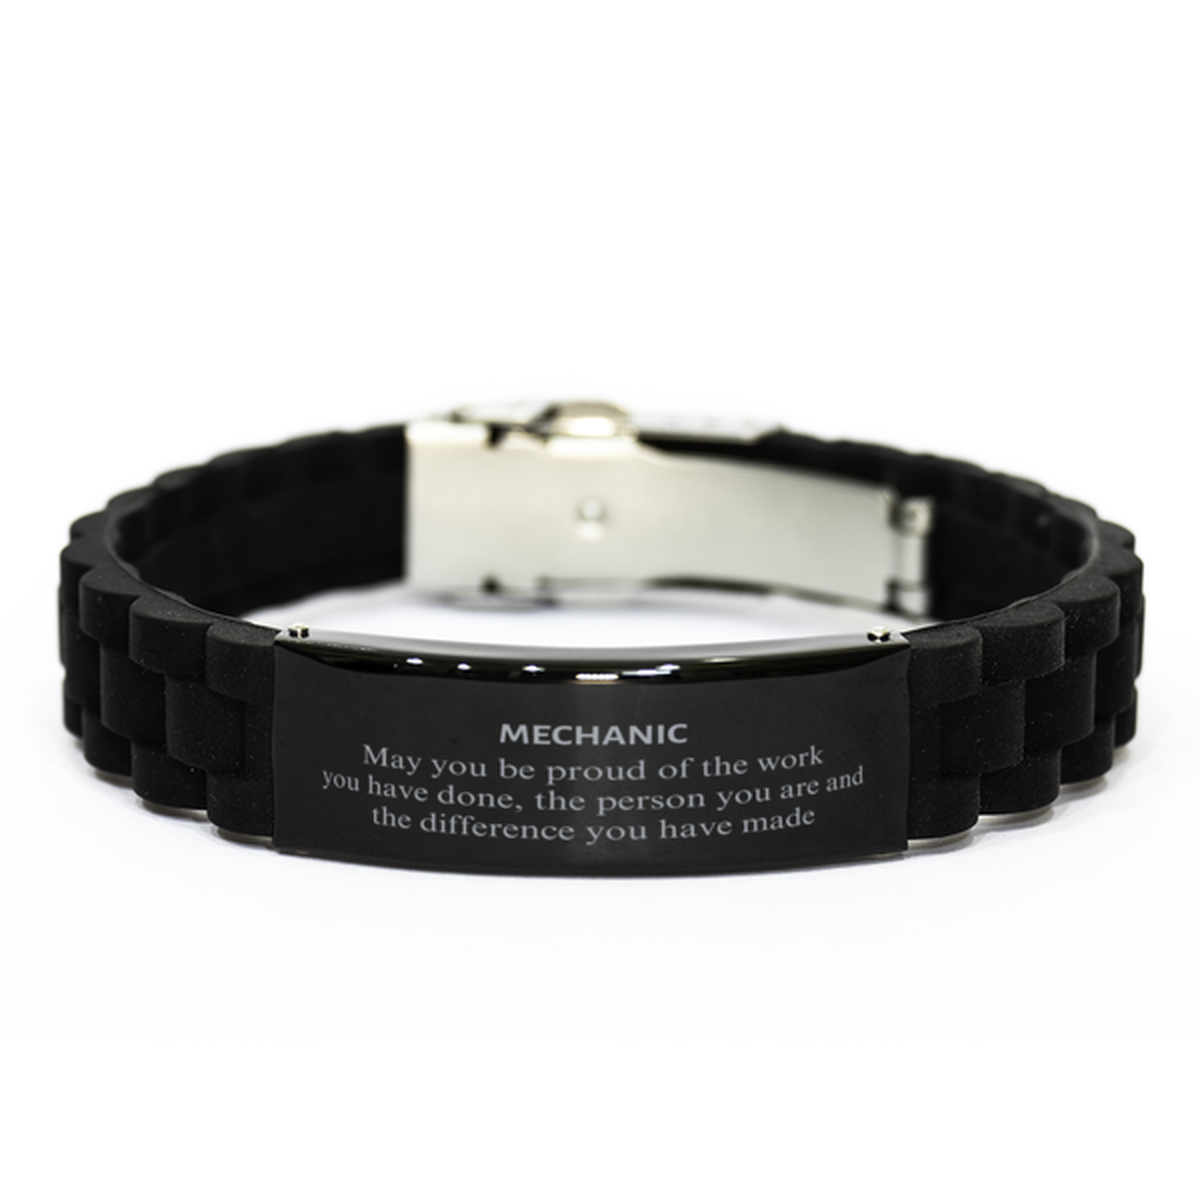 Mechanic May you be proud of the work you have done, Retirement Mechanic Black Glidelock Clasp Bracelet for Colleague Appreciation Gifts Amazing for Mechanic